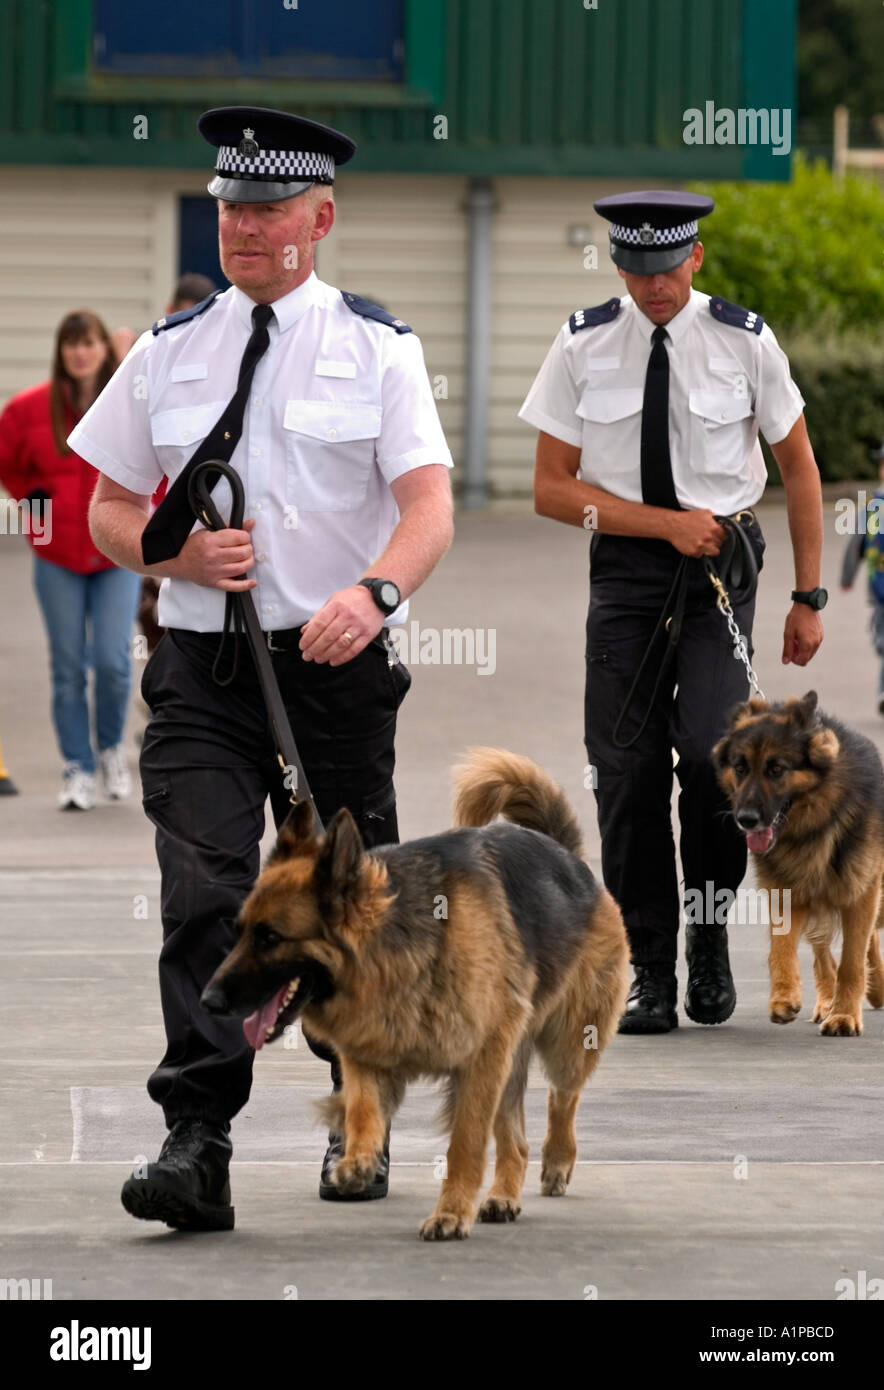 do dog handlers own the dogs